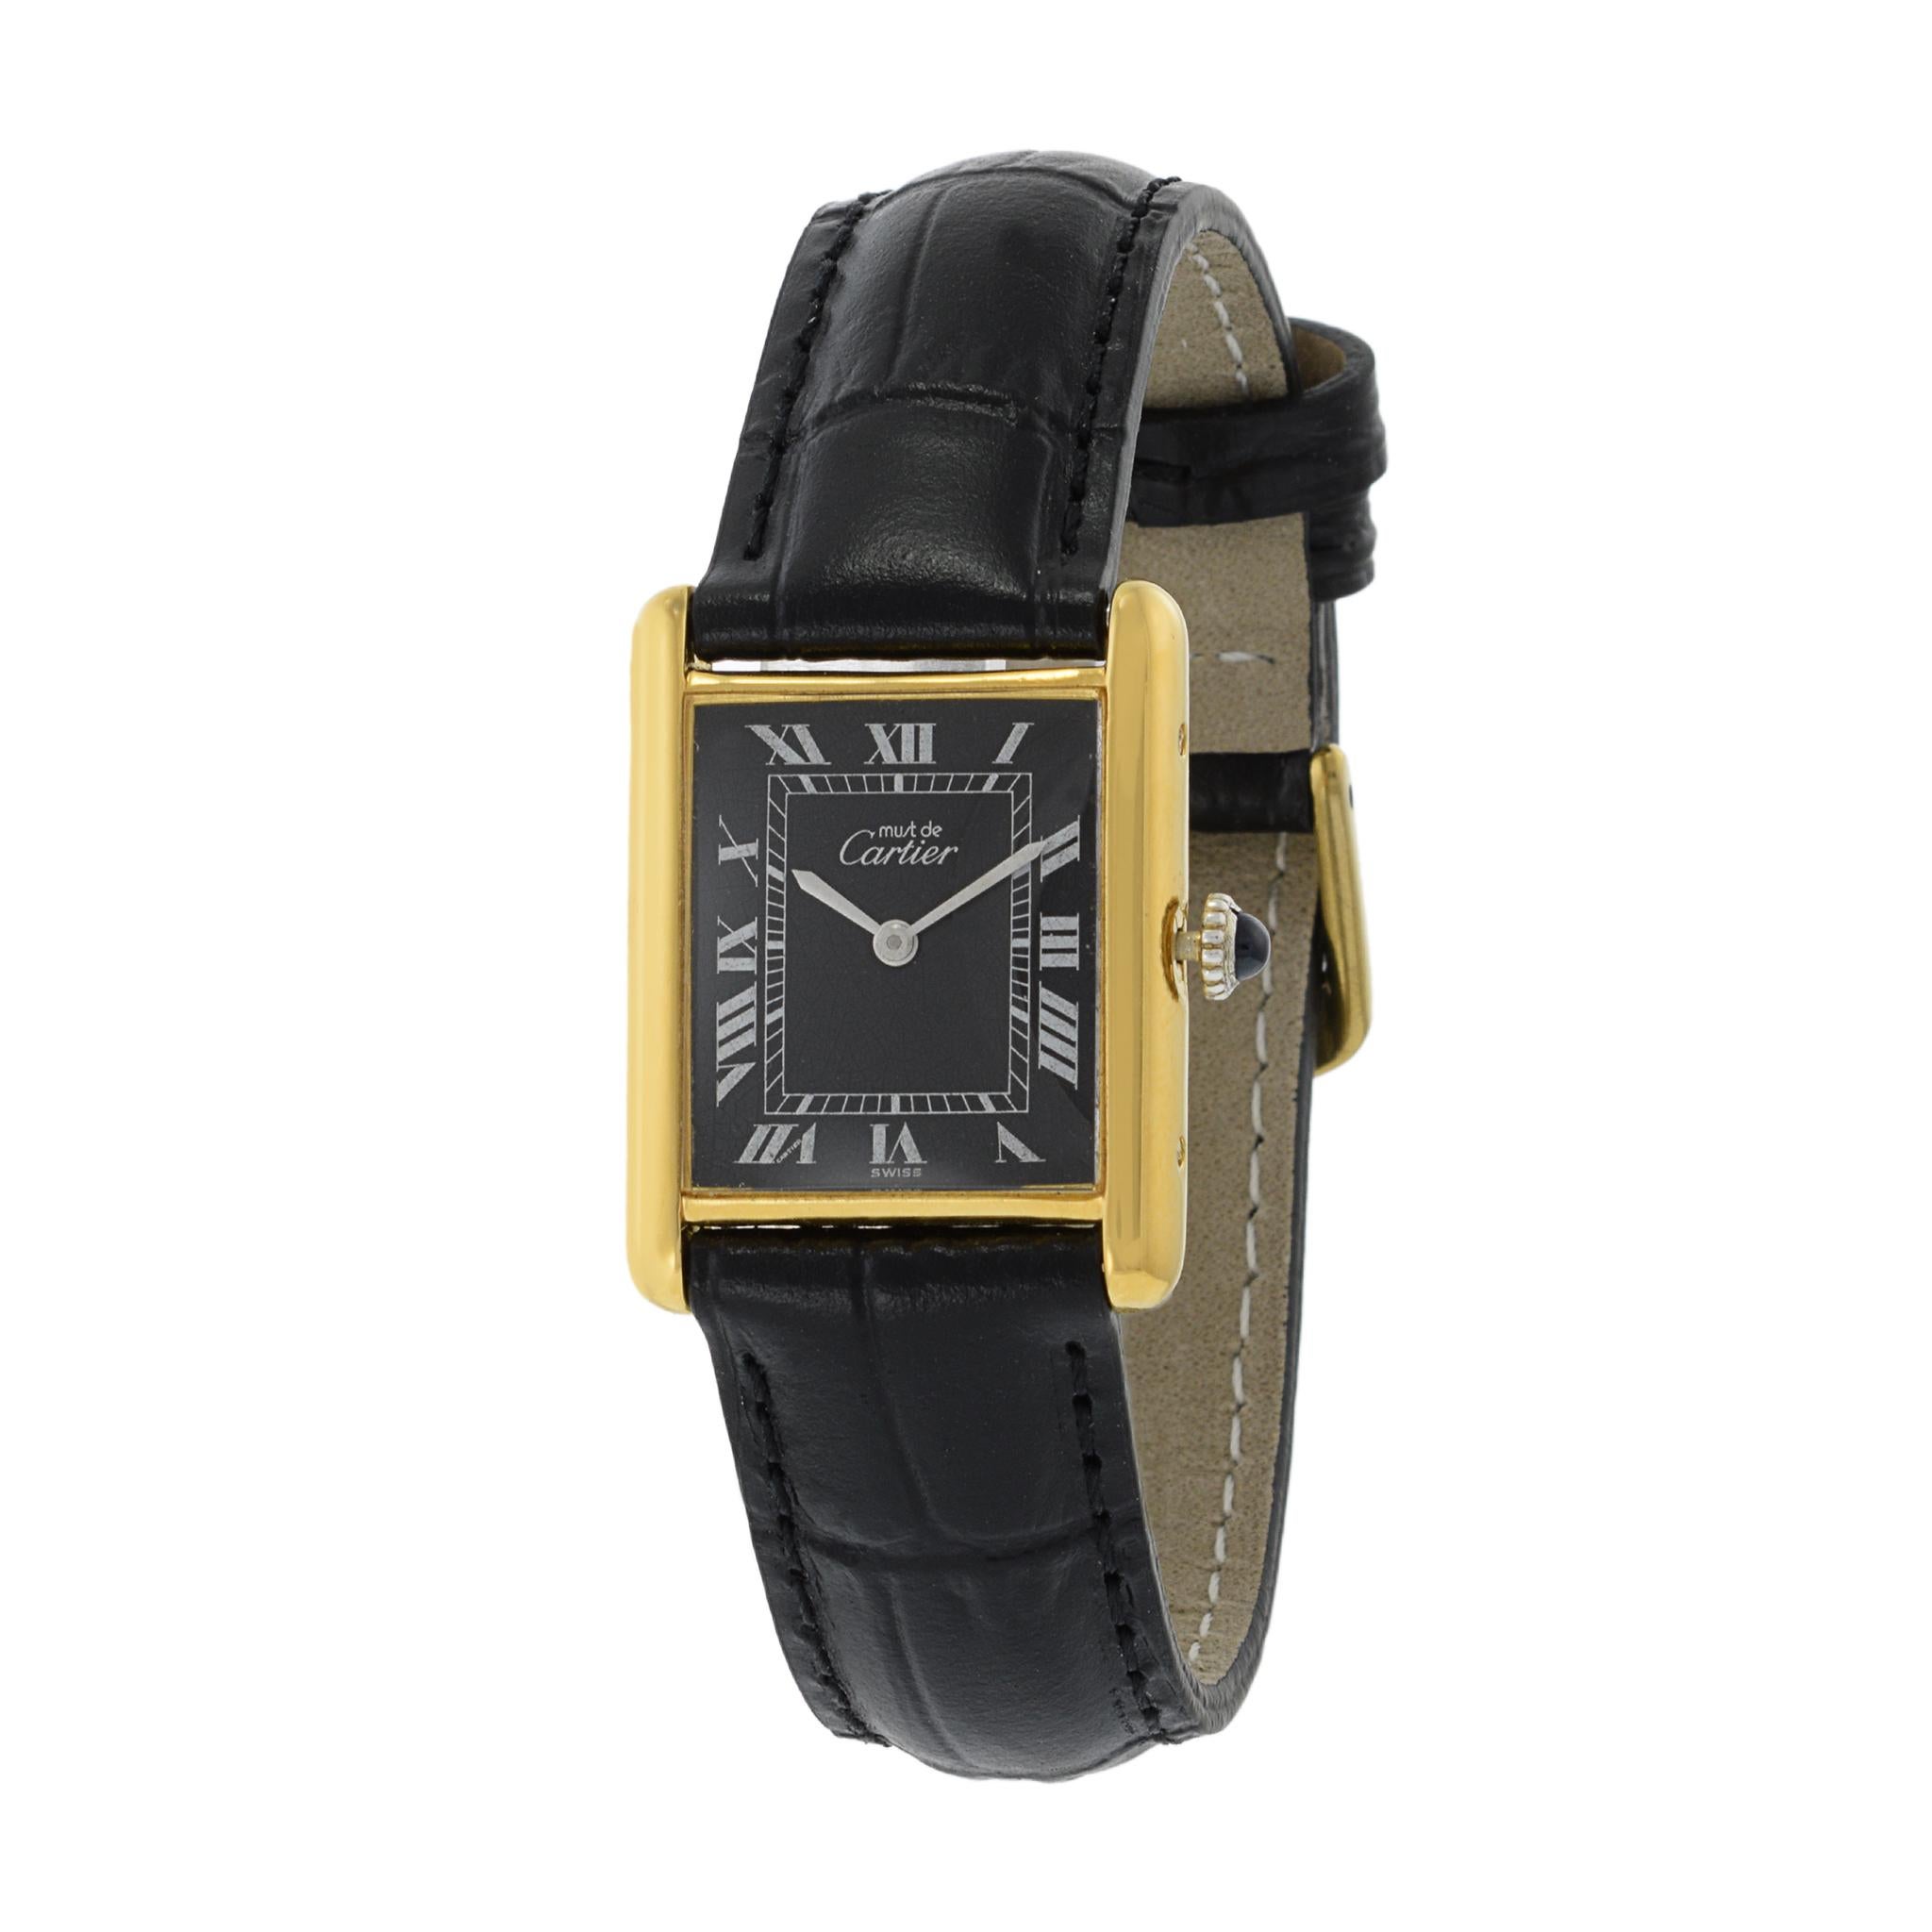 This is a great condition 1970's Must de Cartier Vermeil tank watch. The watch is powered by a manual wind movement. The case of the watch measures 23.5mm x 30.5mm and is sterling silver overlayed with yellow gold.

The dial of the watch is black